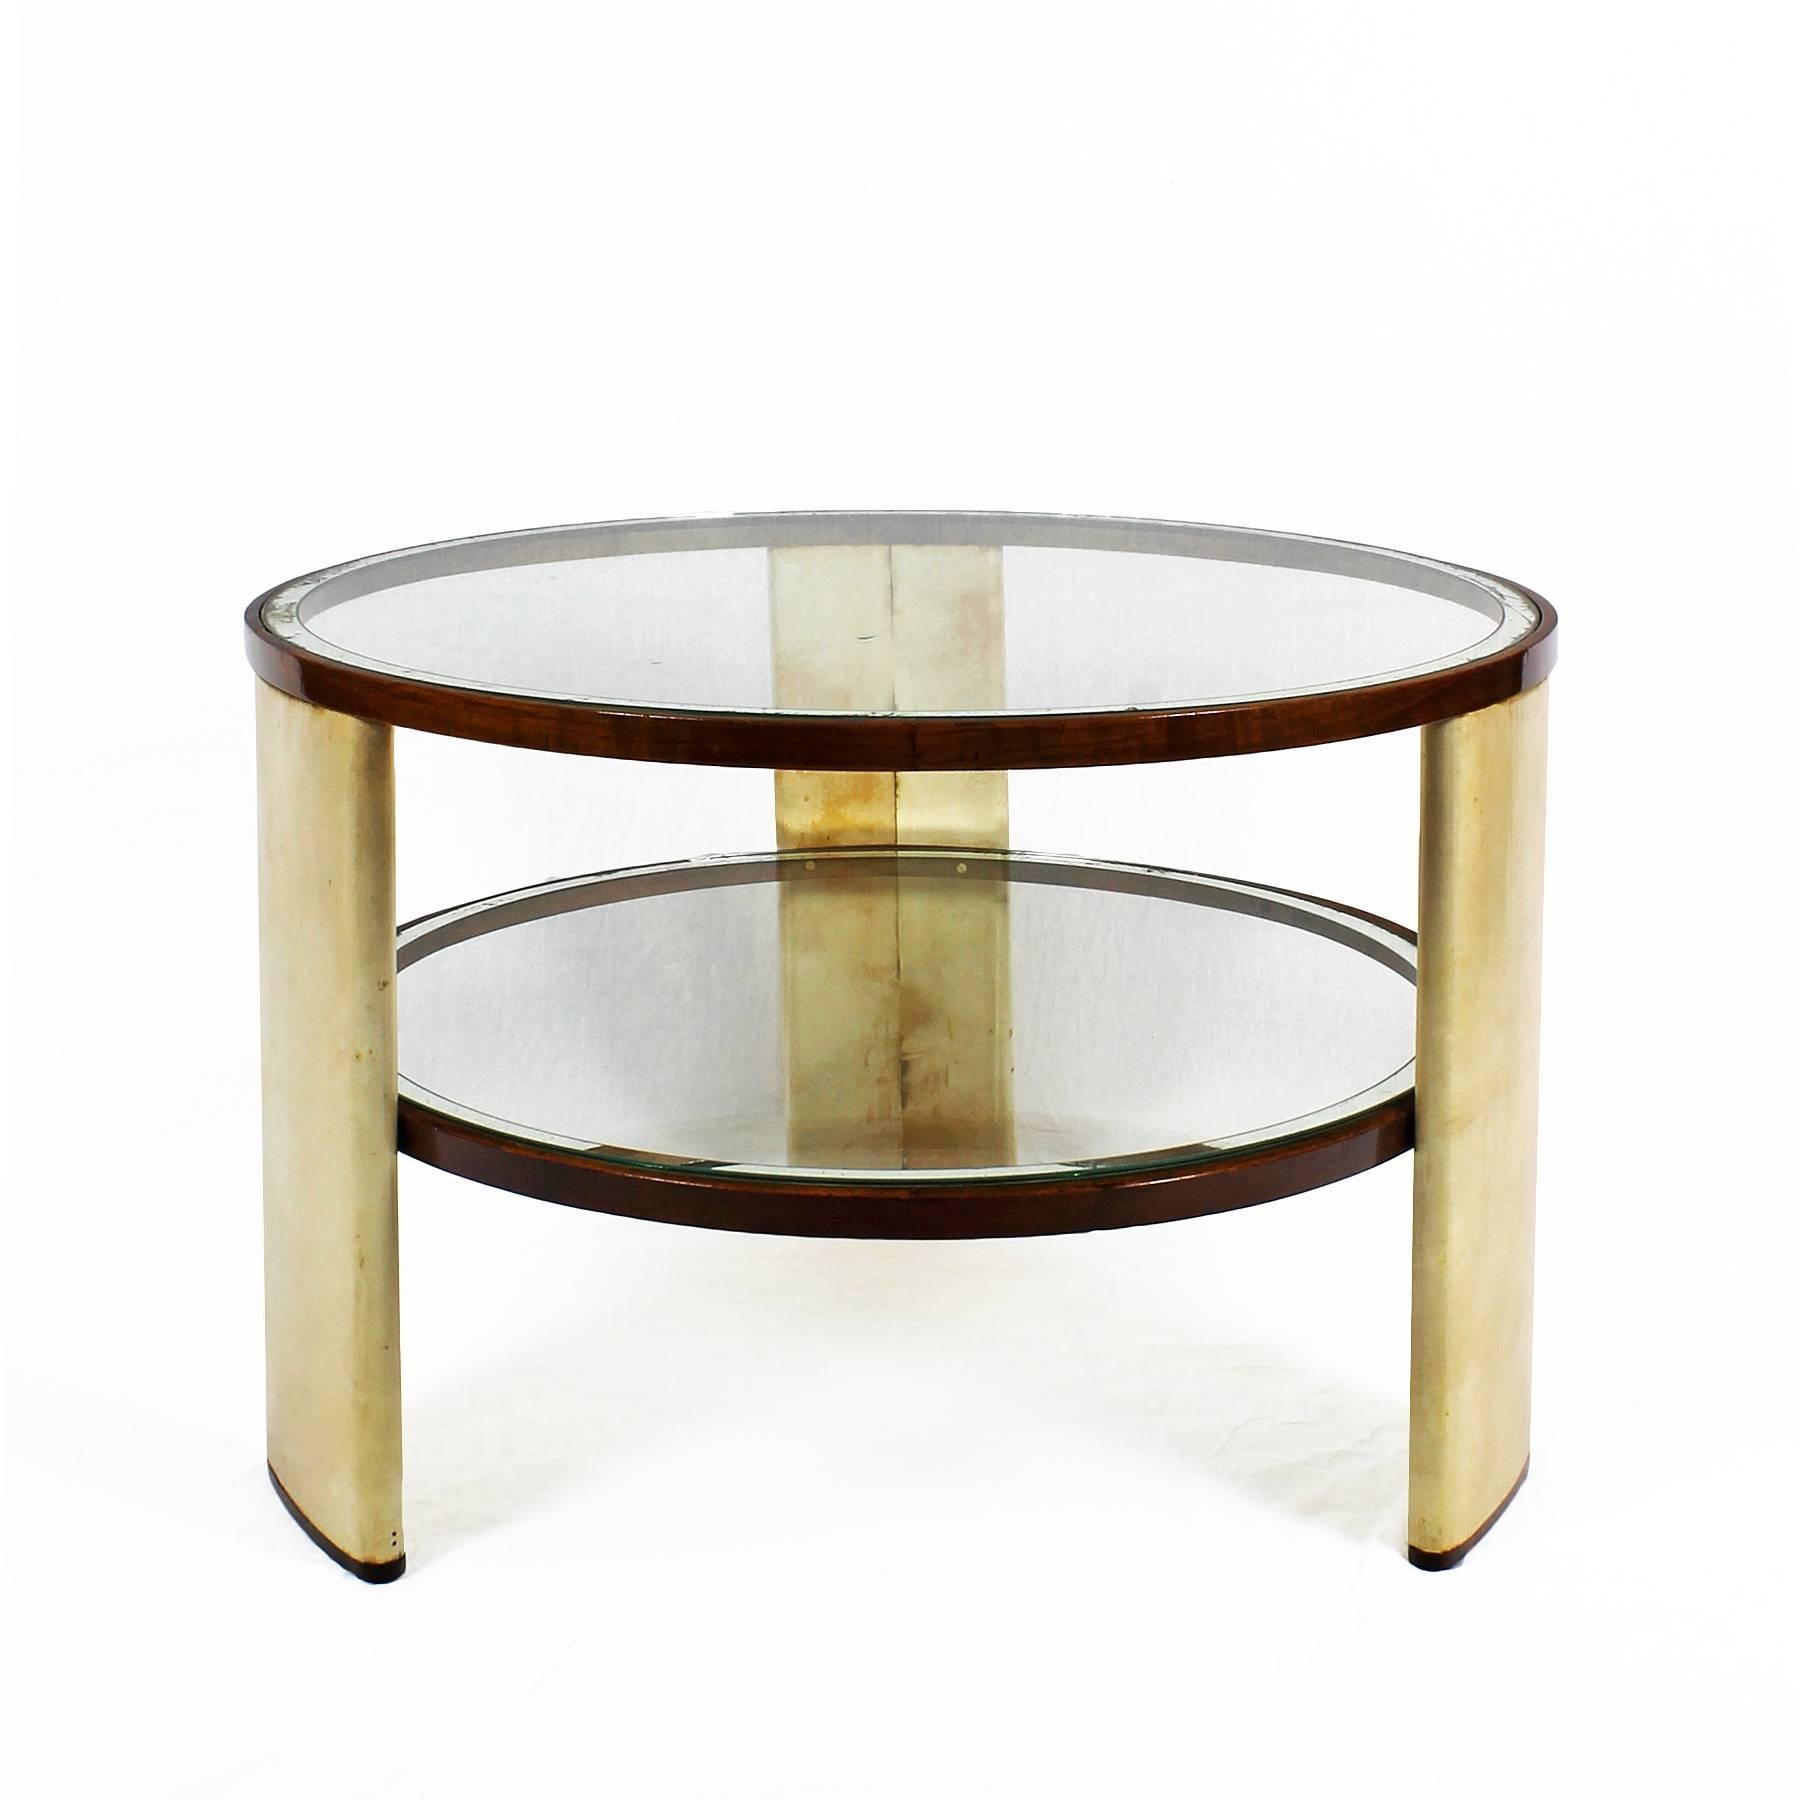 Rare Art Deco side table with three parchment covered wood stands with walnut bases. Two glass trays with mirror strips, one inserted at mid height and the other one on top of stands, French polish,

Italy, circa 1930

The table is in good